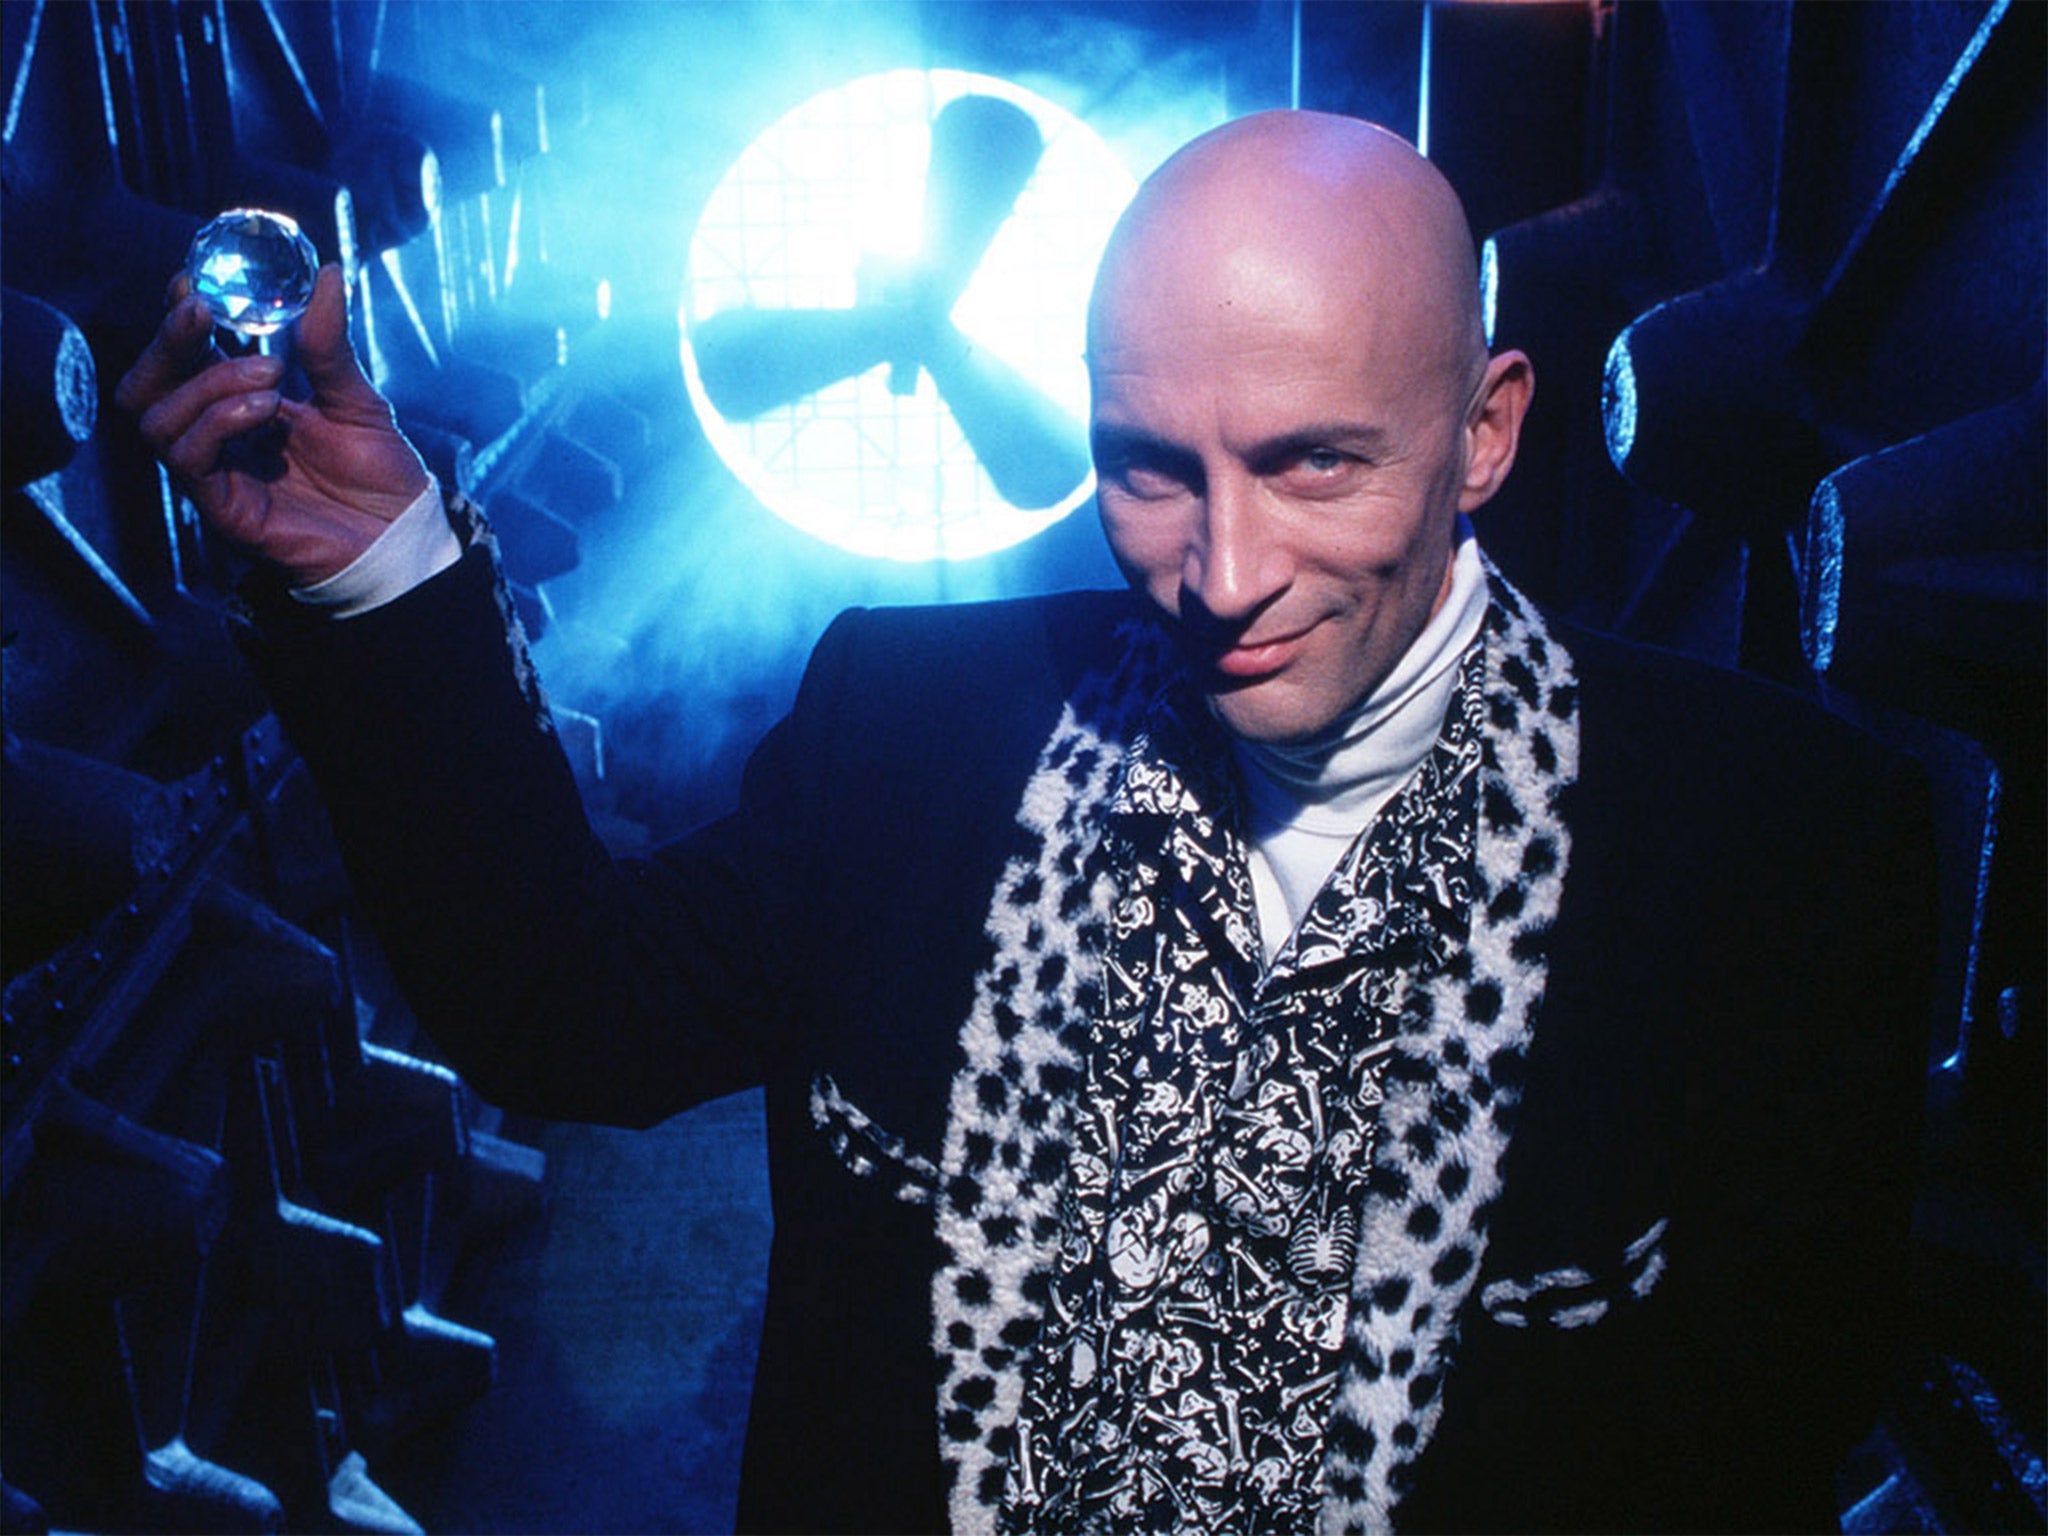 'The Crystal Maze' presenter Richard O'Brien holds aloft one of the coveted gems